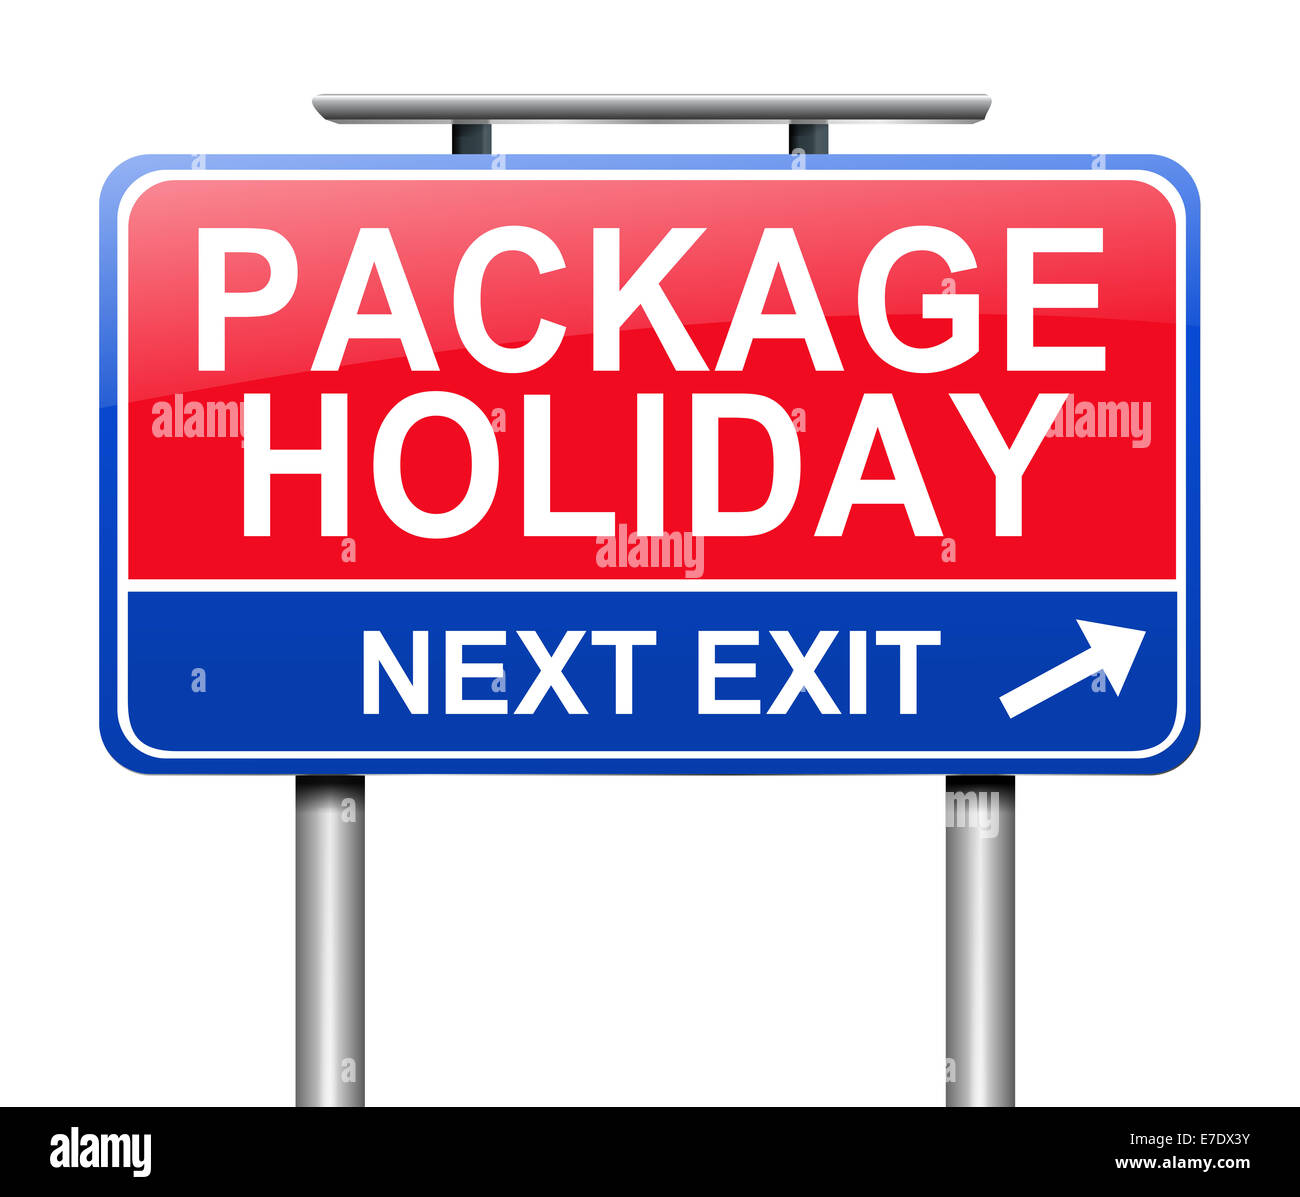 Package holiday concept. Stock Photo